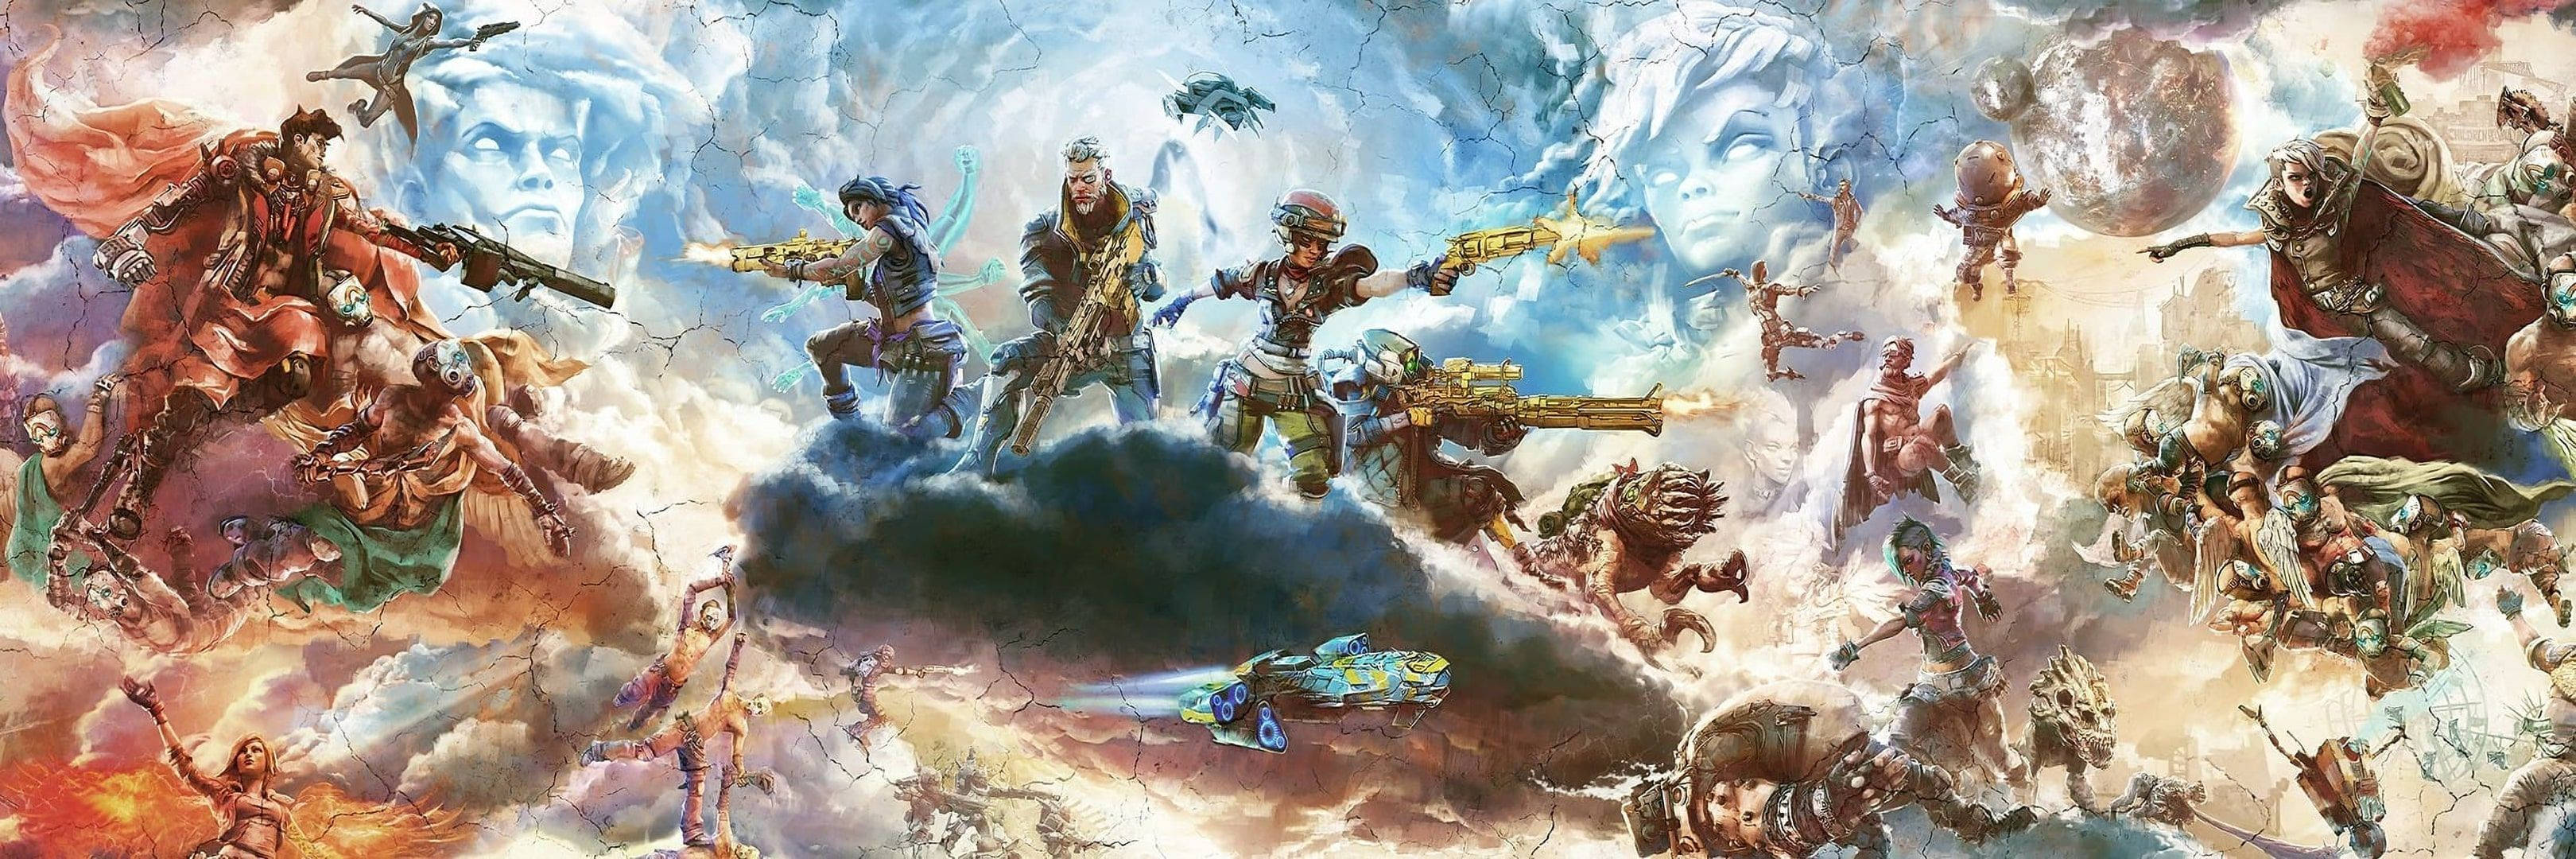 Welcome To Borderlands 3 - Play Now! Wallpaper